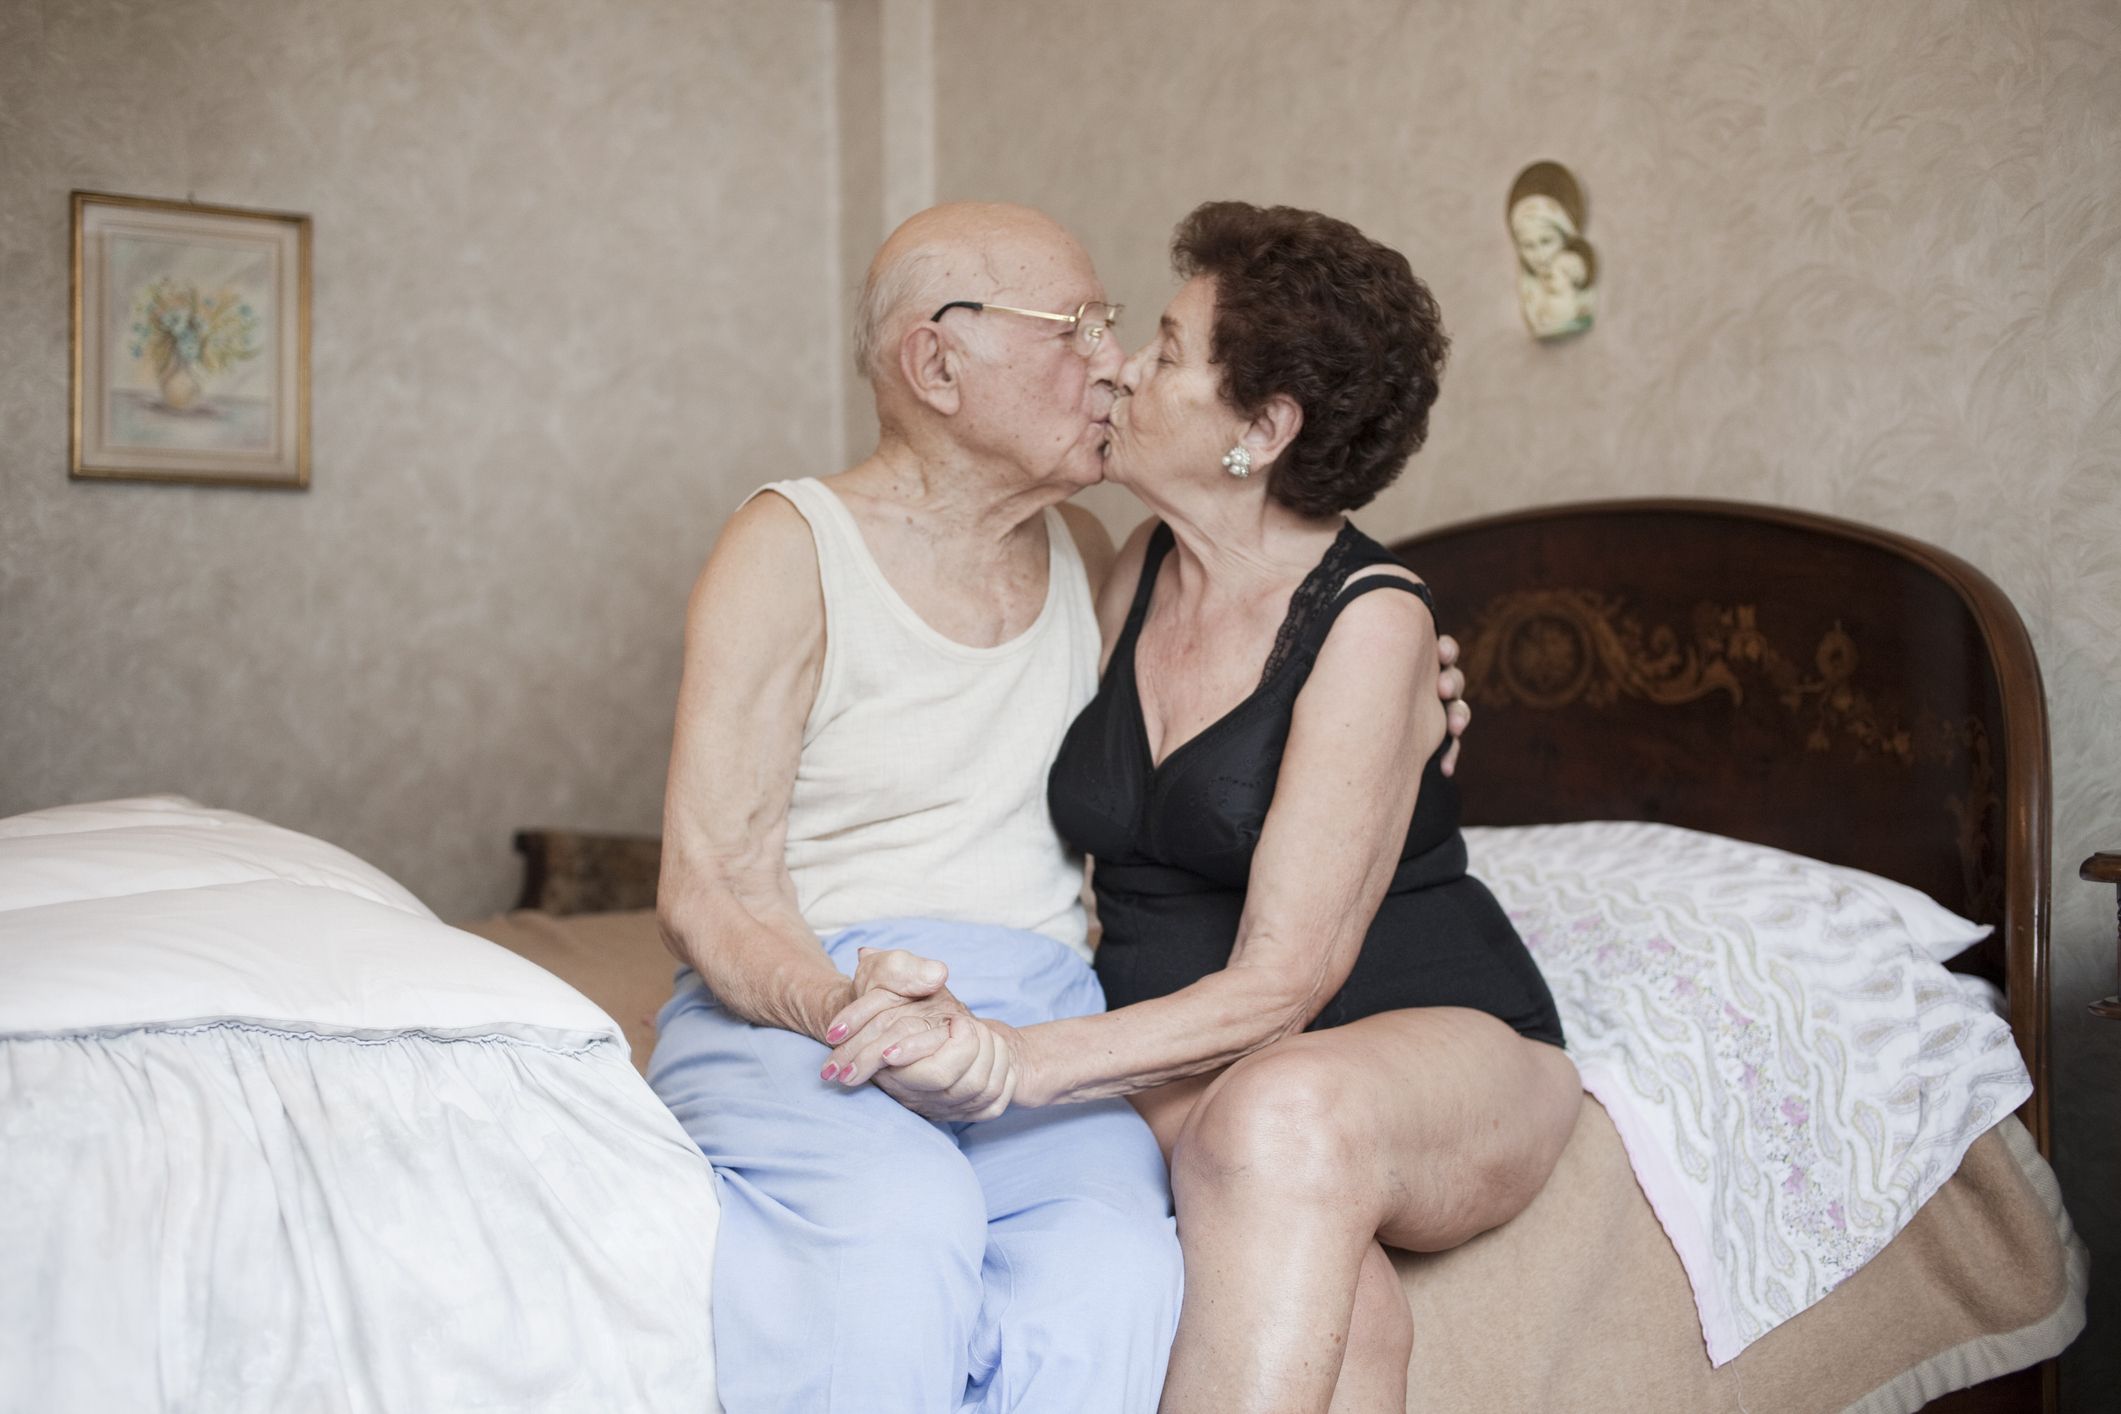 Why are we so uncomfortable with the concept of senior sex? pic